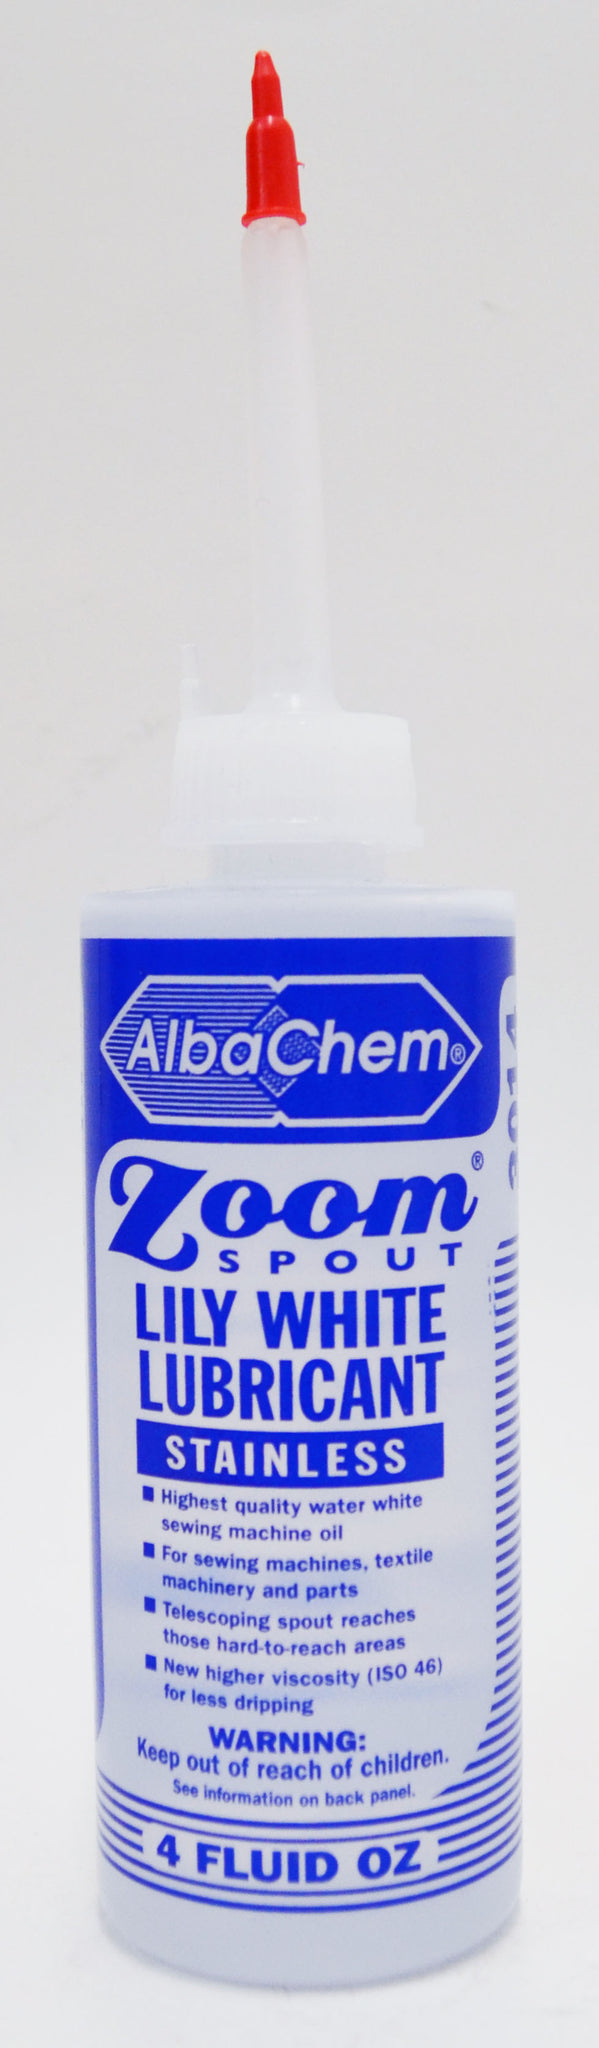 Zoom Spout Lilly White Stainless Sewing Machine Oil